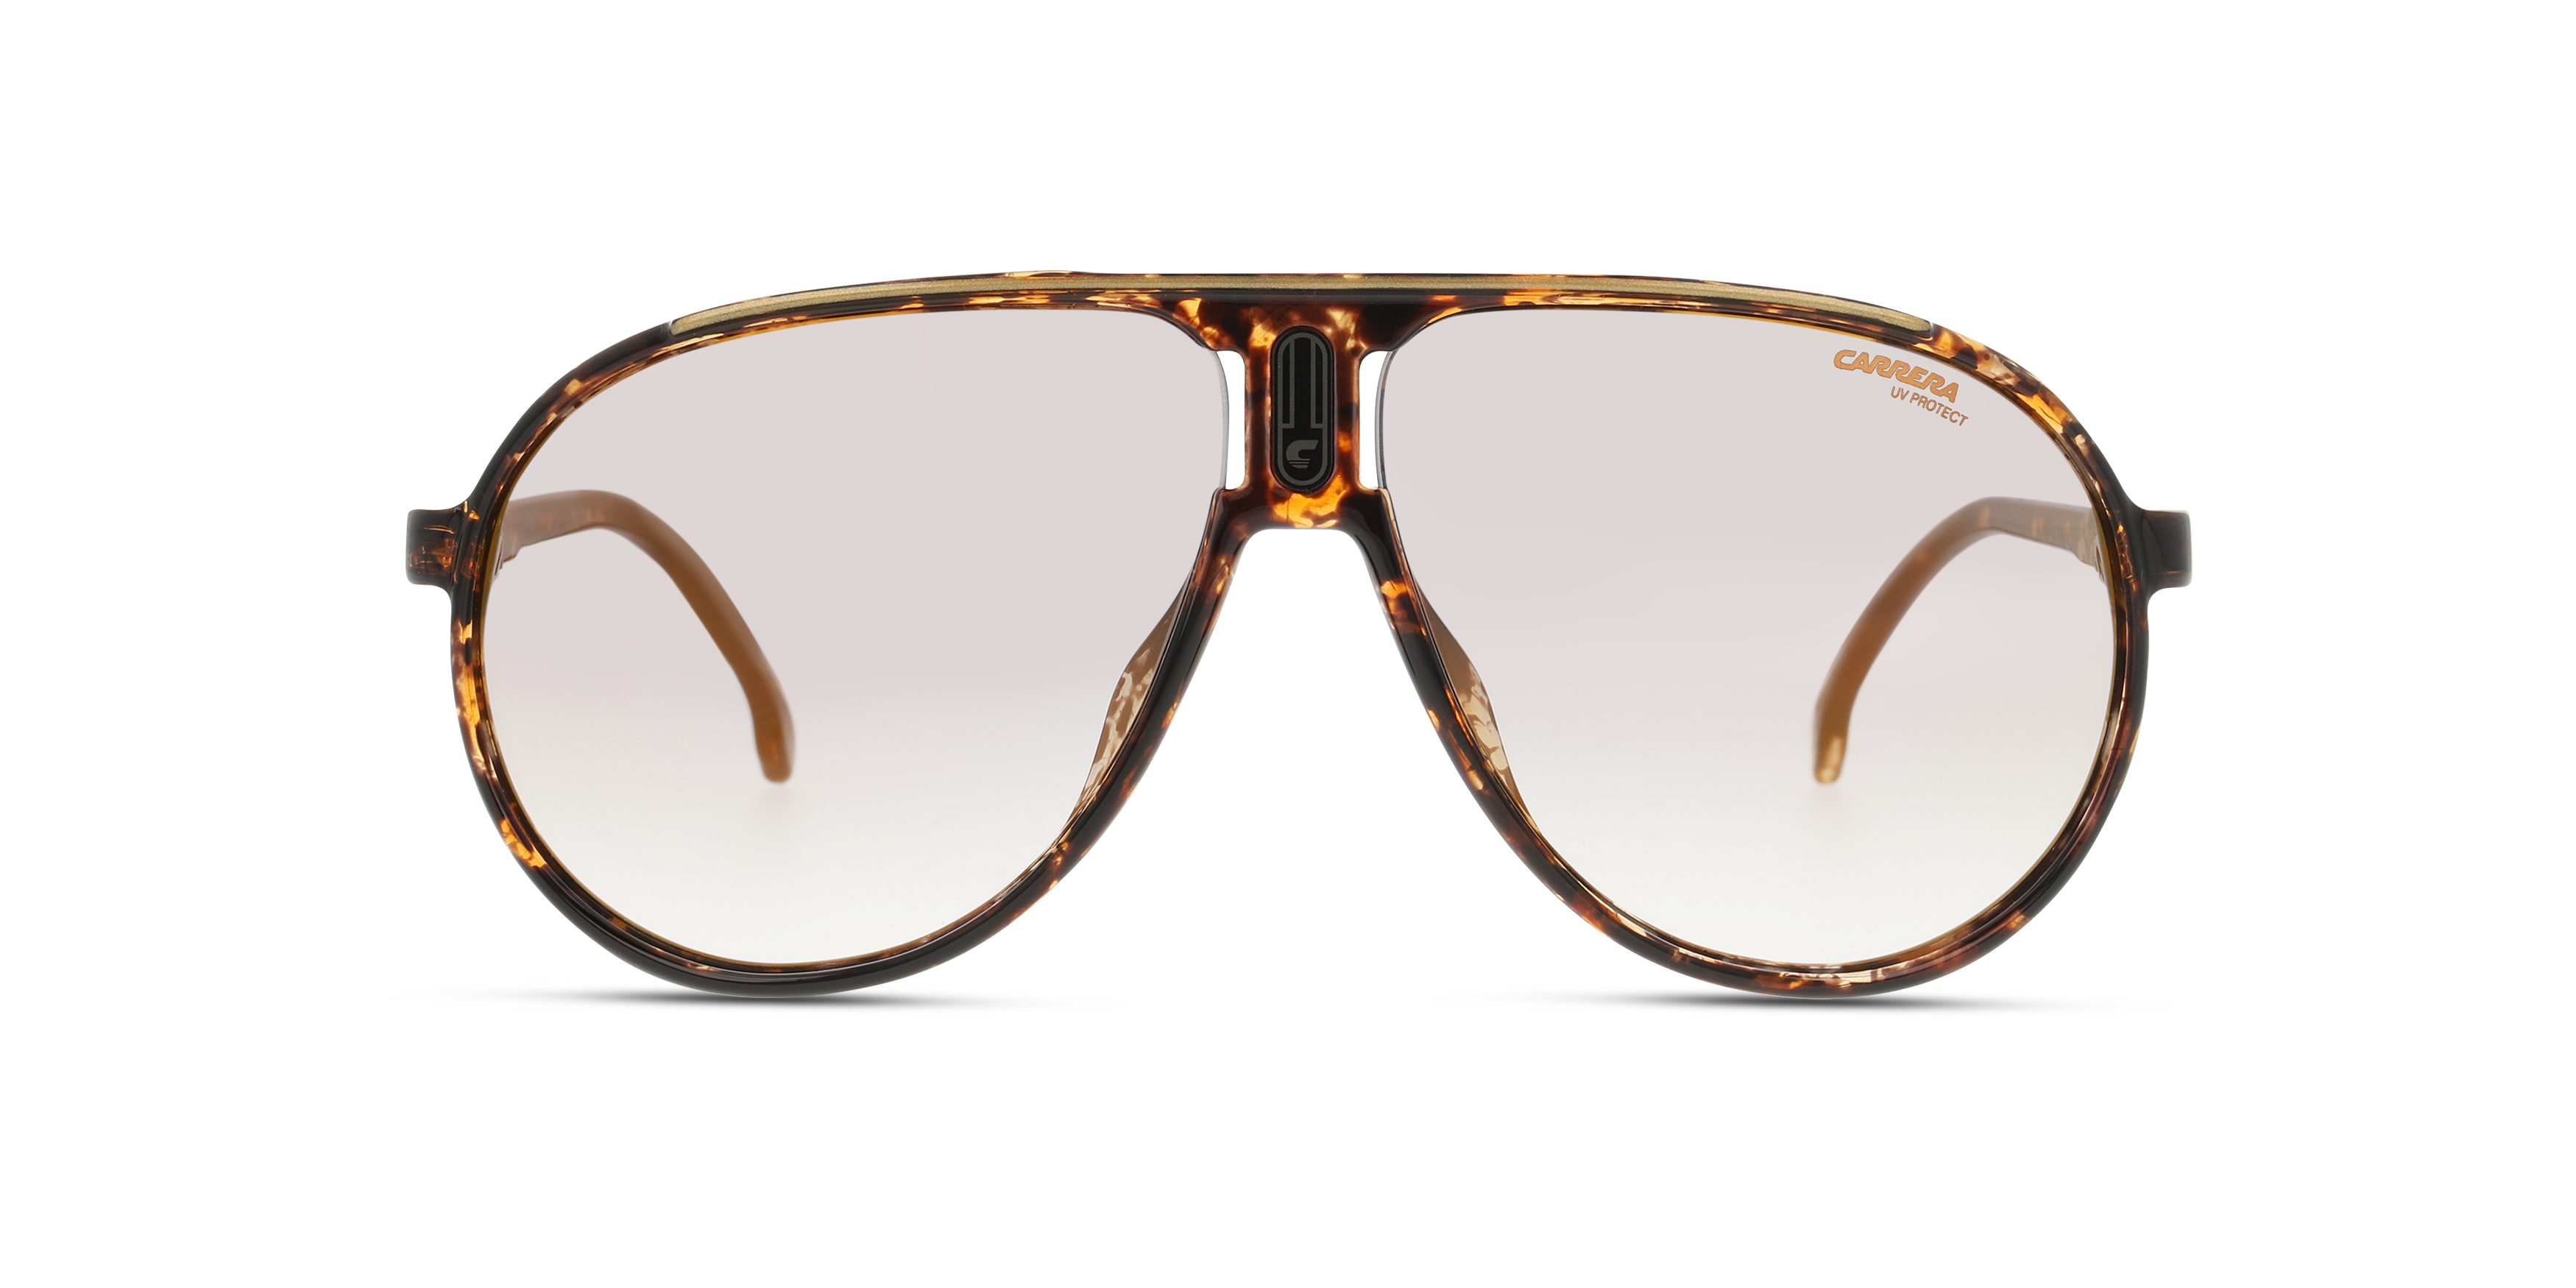 [products.image.front] CARRERA CHAMPION 65/N WR9